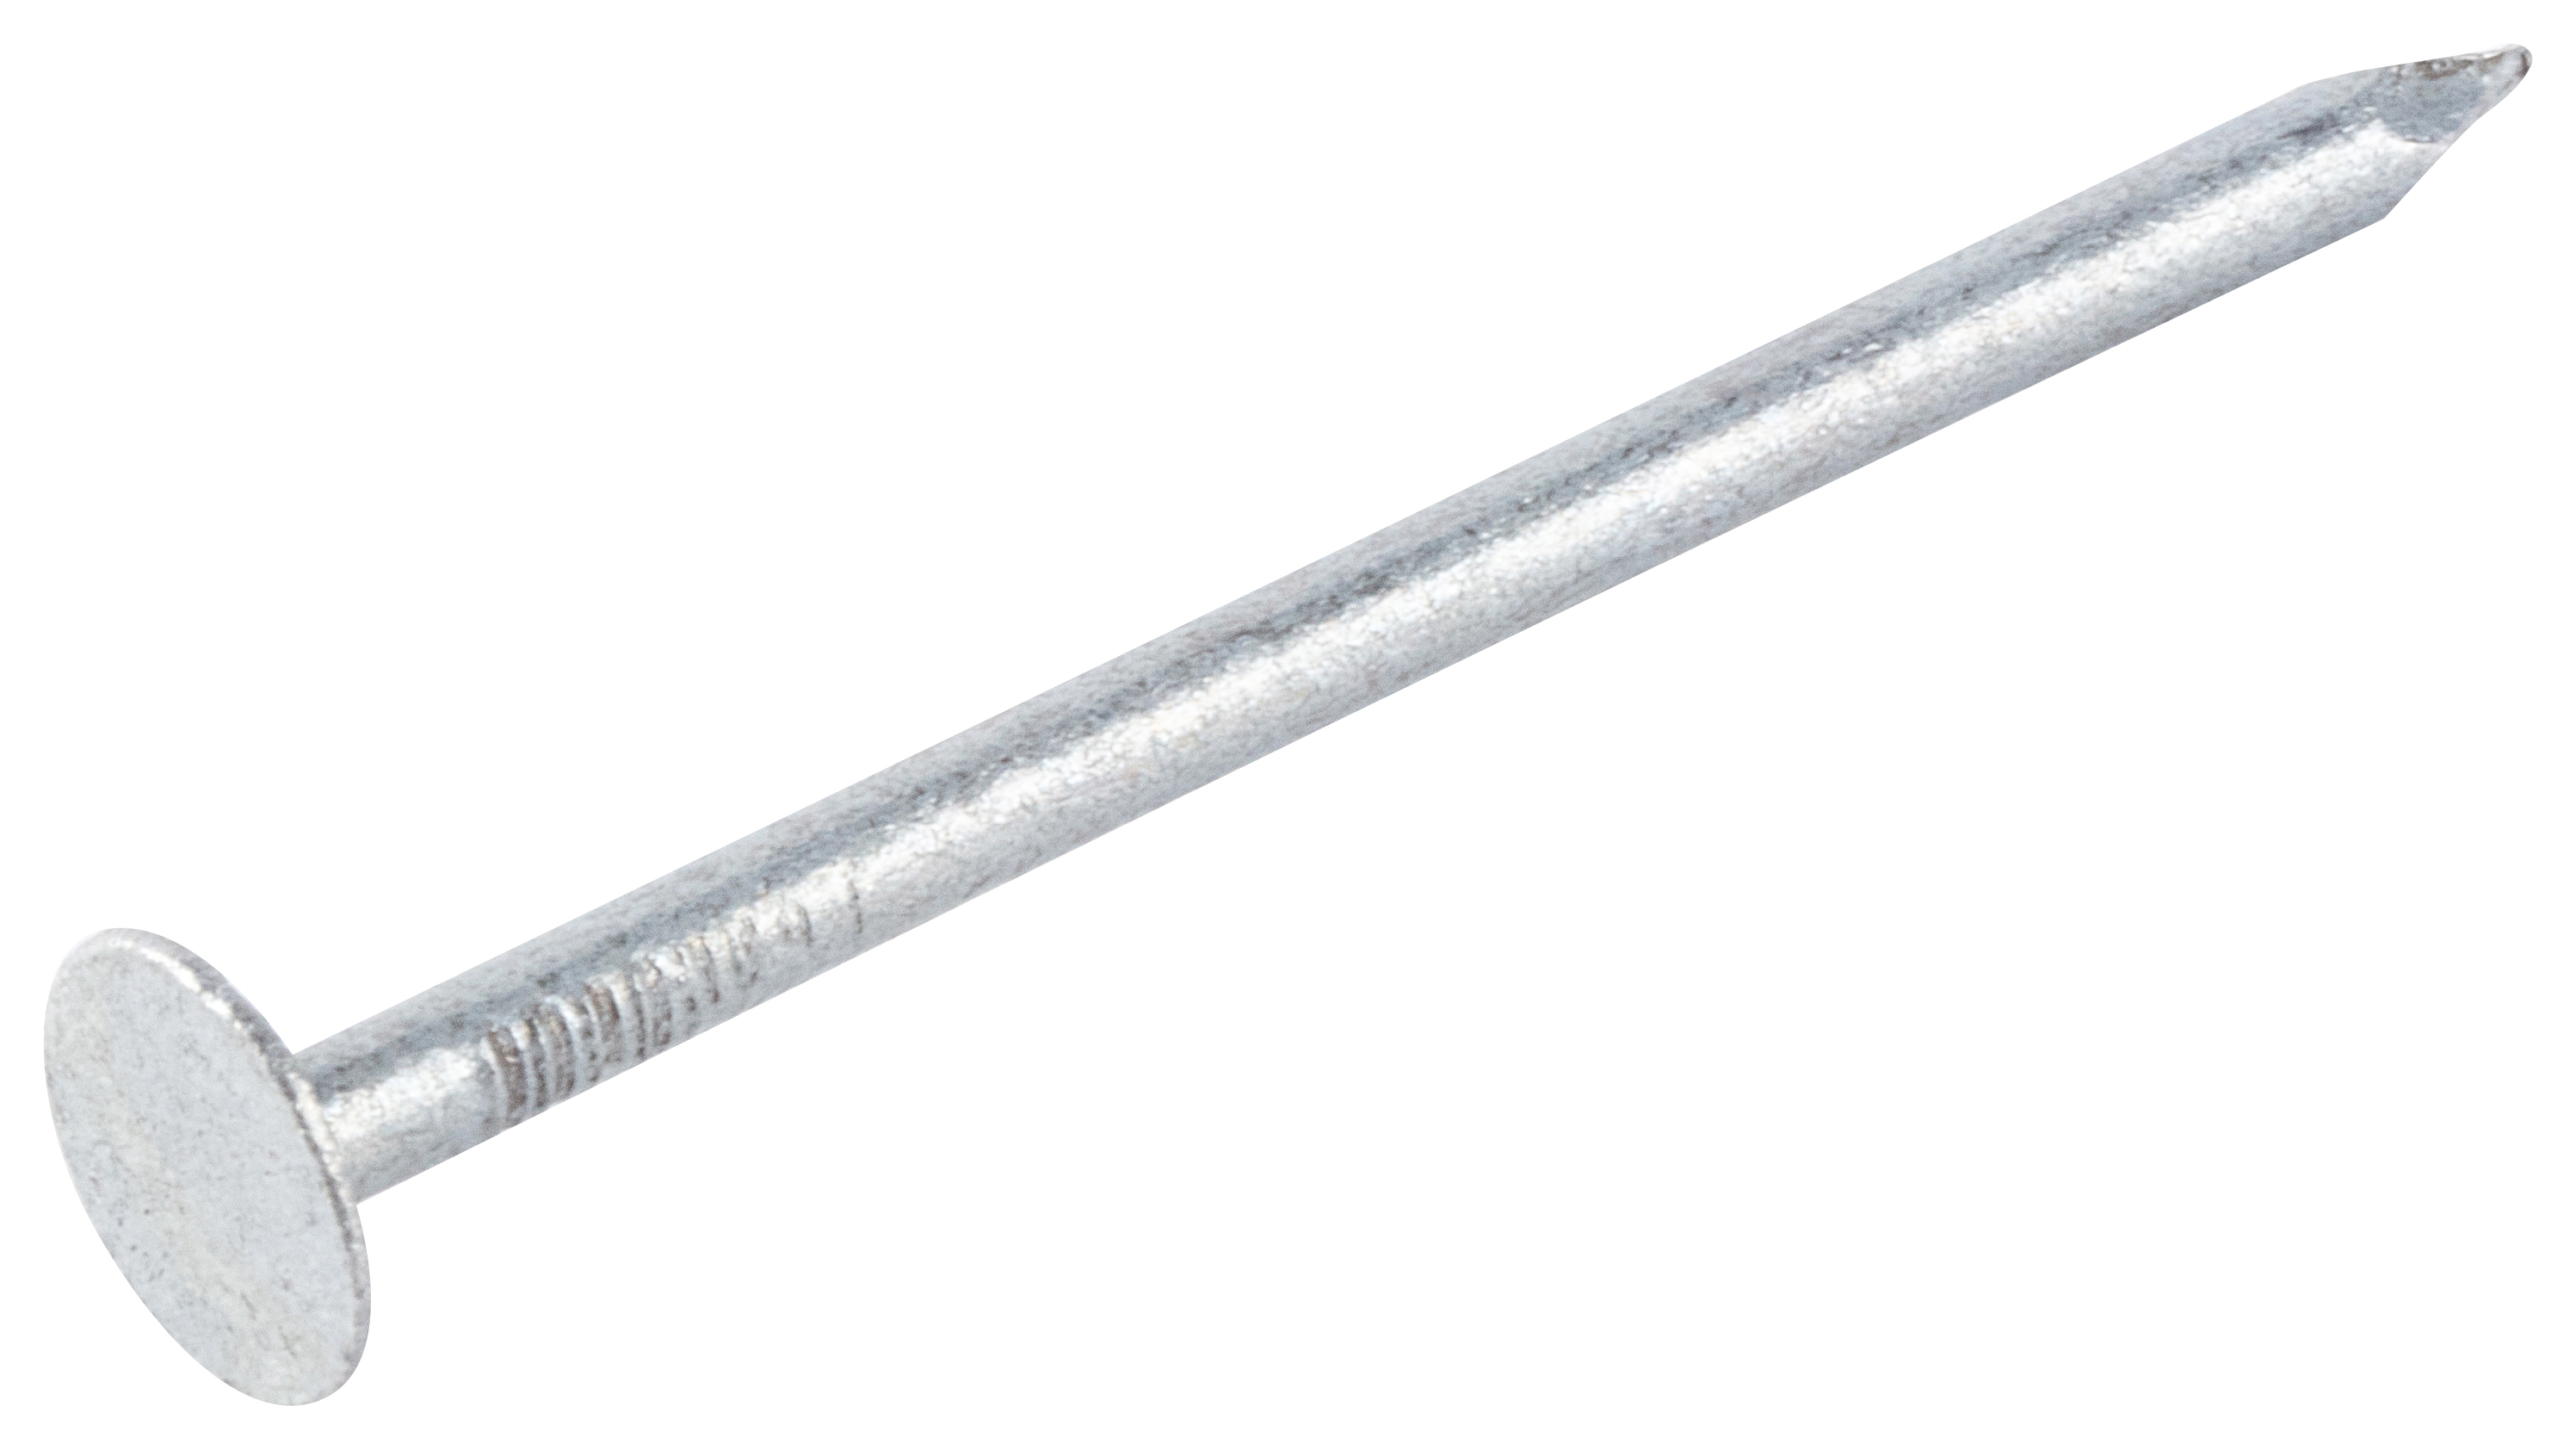 Galvanised Clout Nails - 50 x 2.65mm - 500g